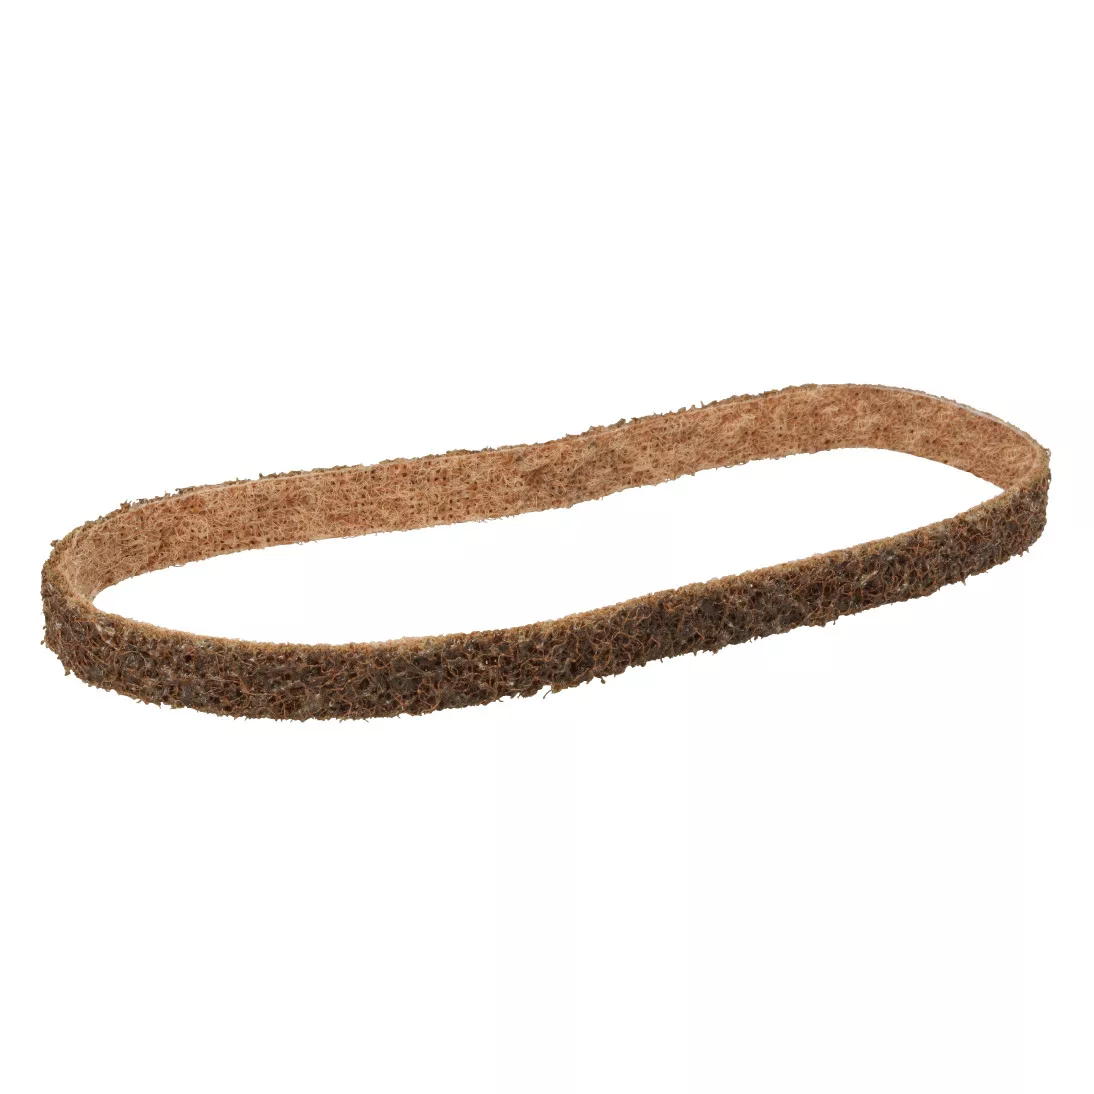 Scotch-Brite™ Surface Conditioning Belt, 1/2 in x 12 in, A CRS, 20
ea/Case